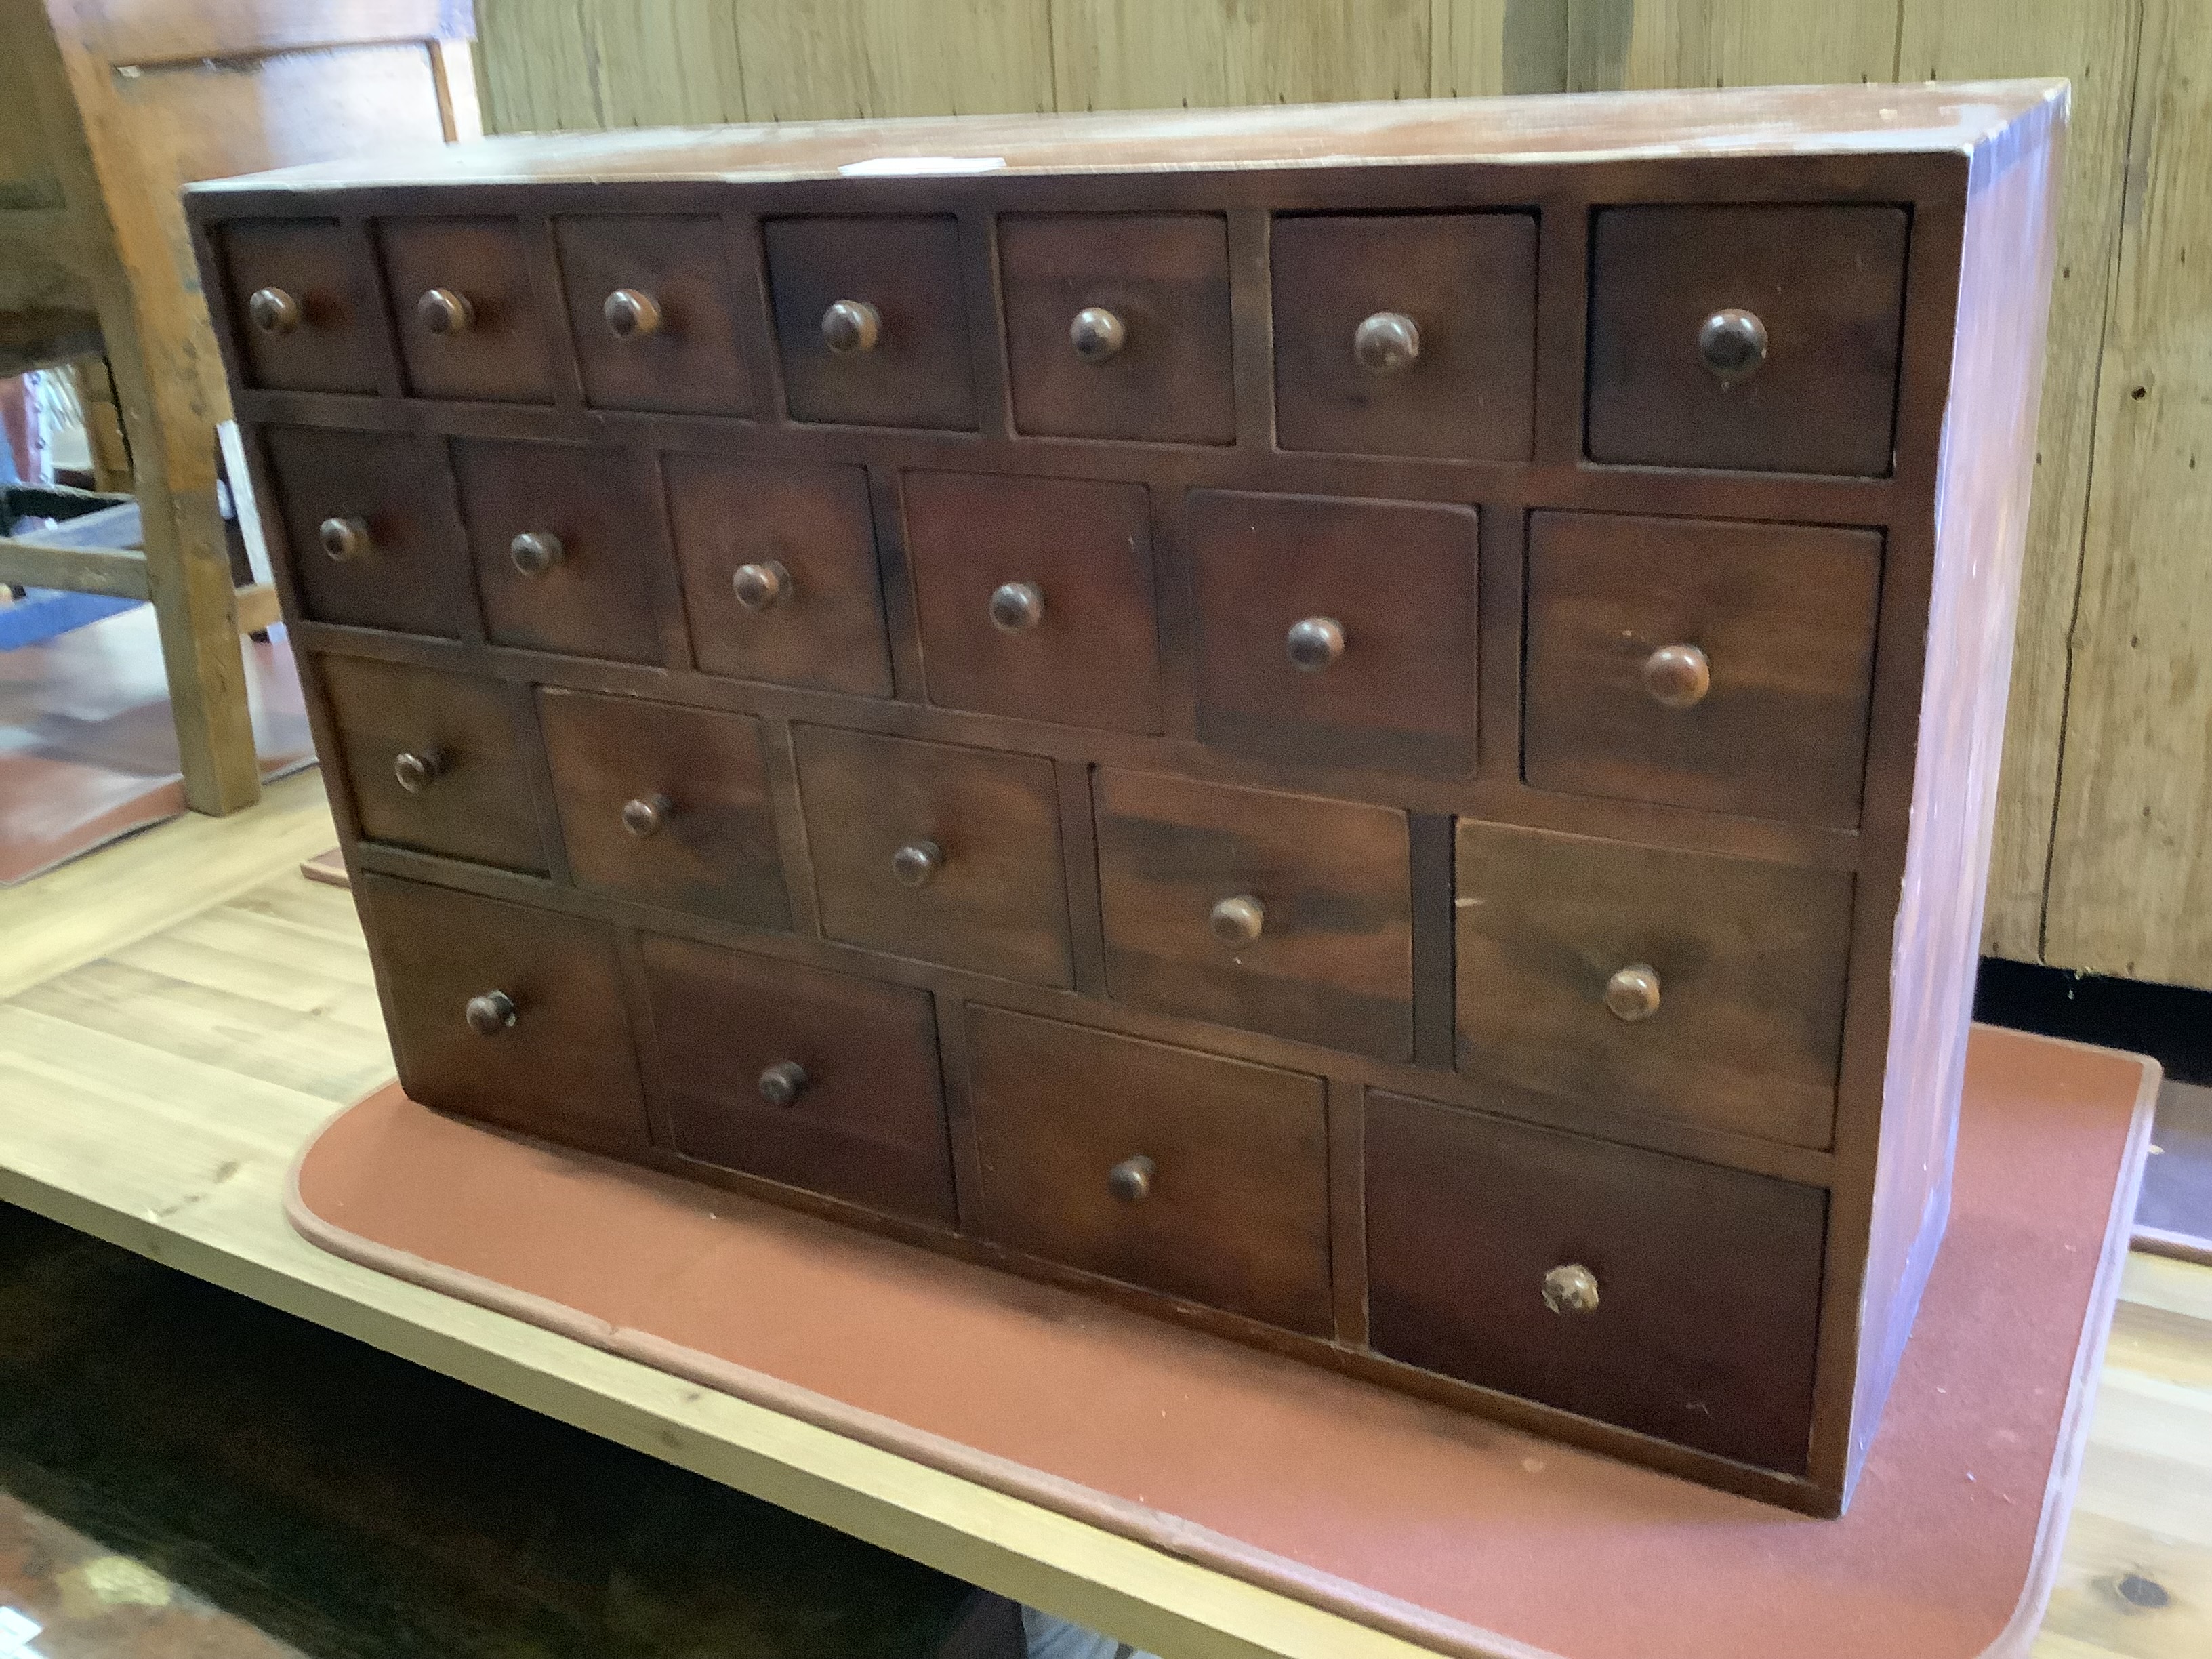 A nest of 22 drawers